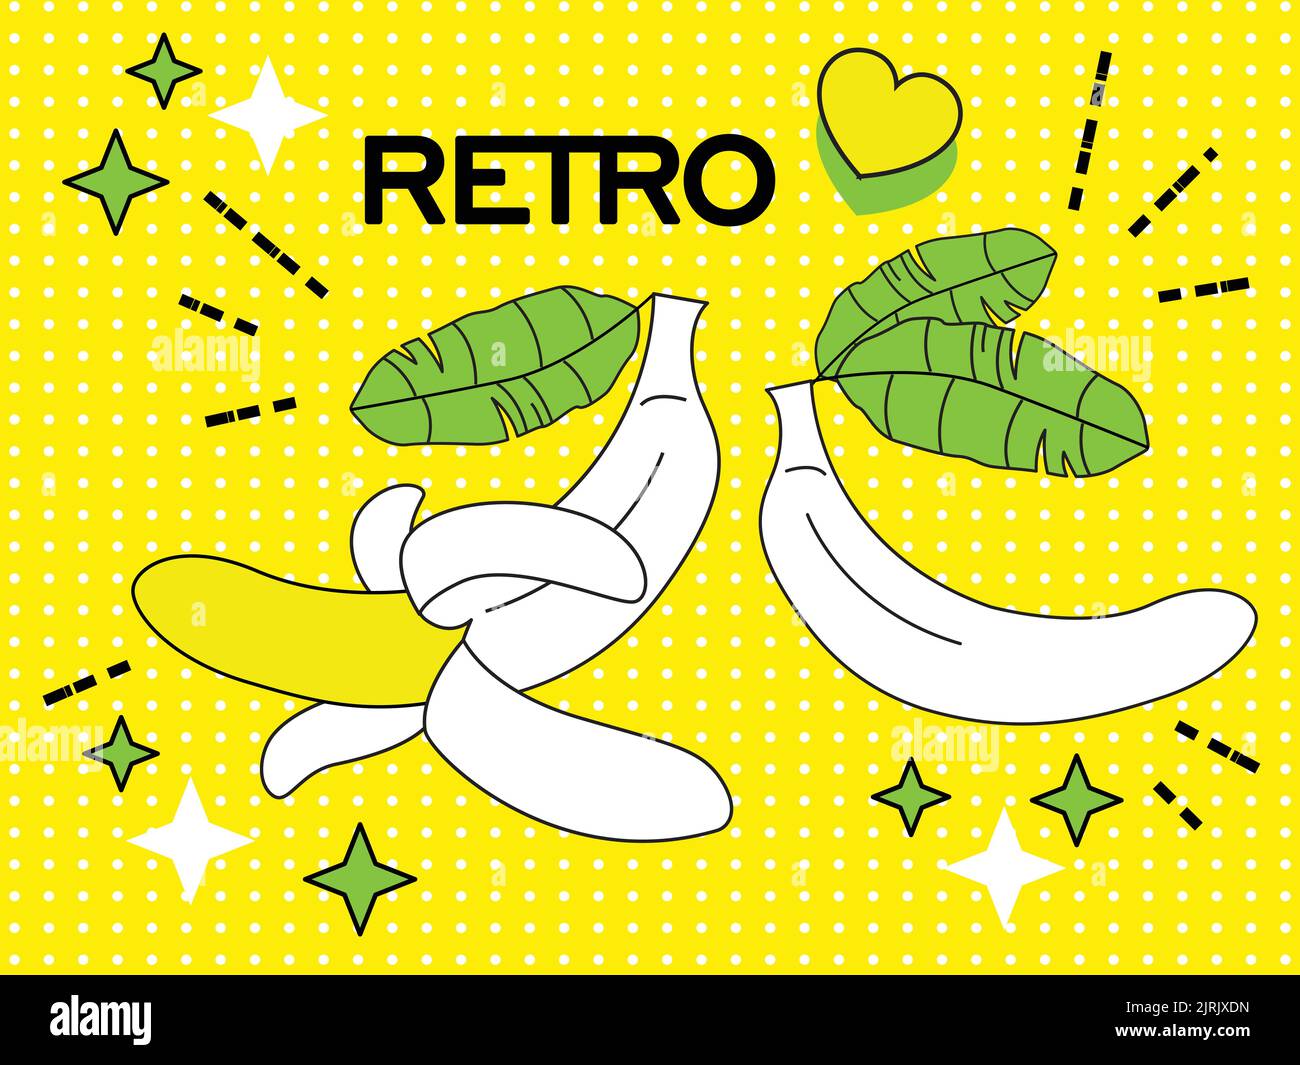 Retro Pop Art of yellow bananas on an yellow background. Cartoon retro banner for web banners, websites,   magazine covers. Vector illustration. Stock Vector